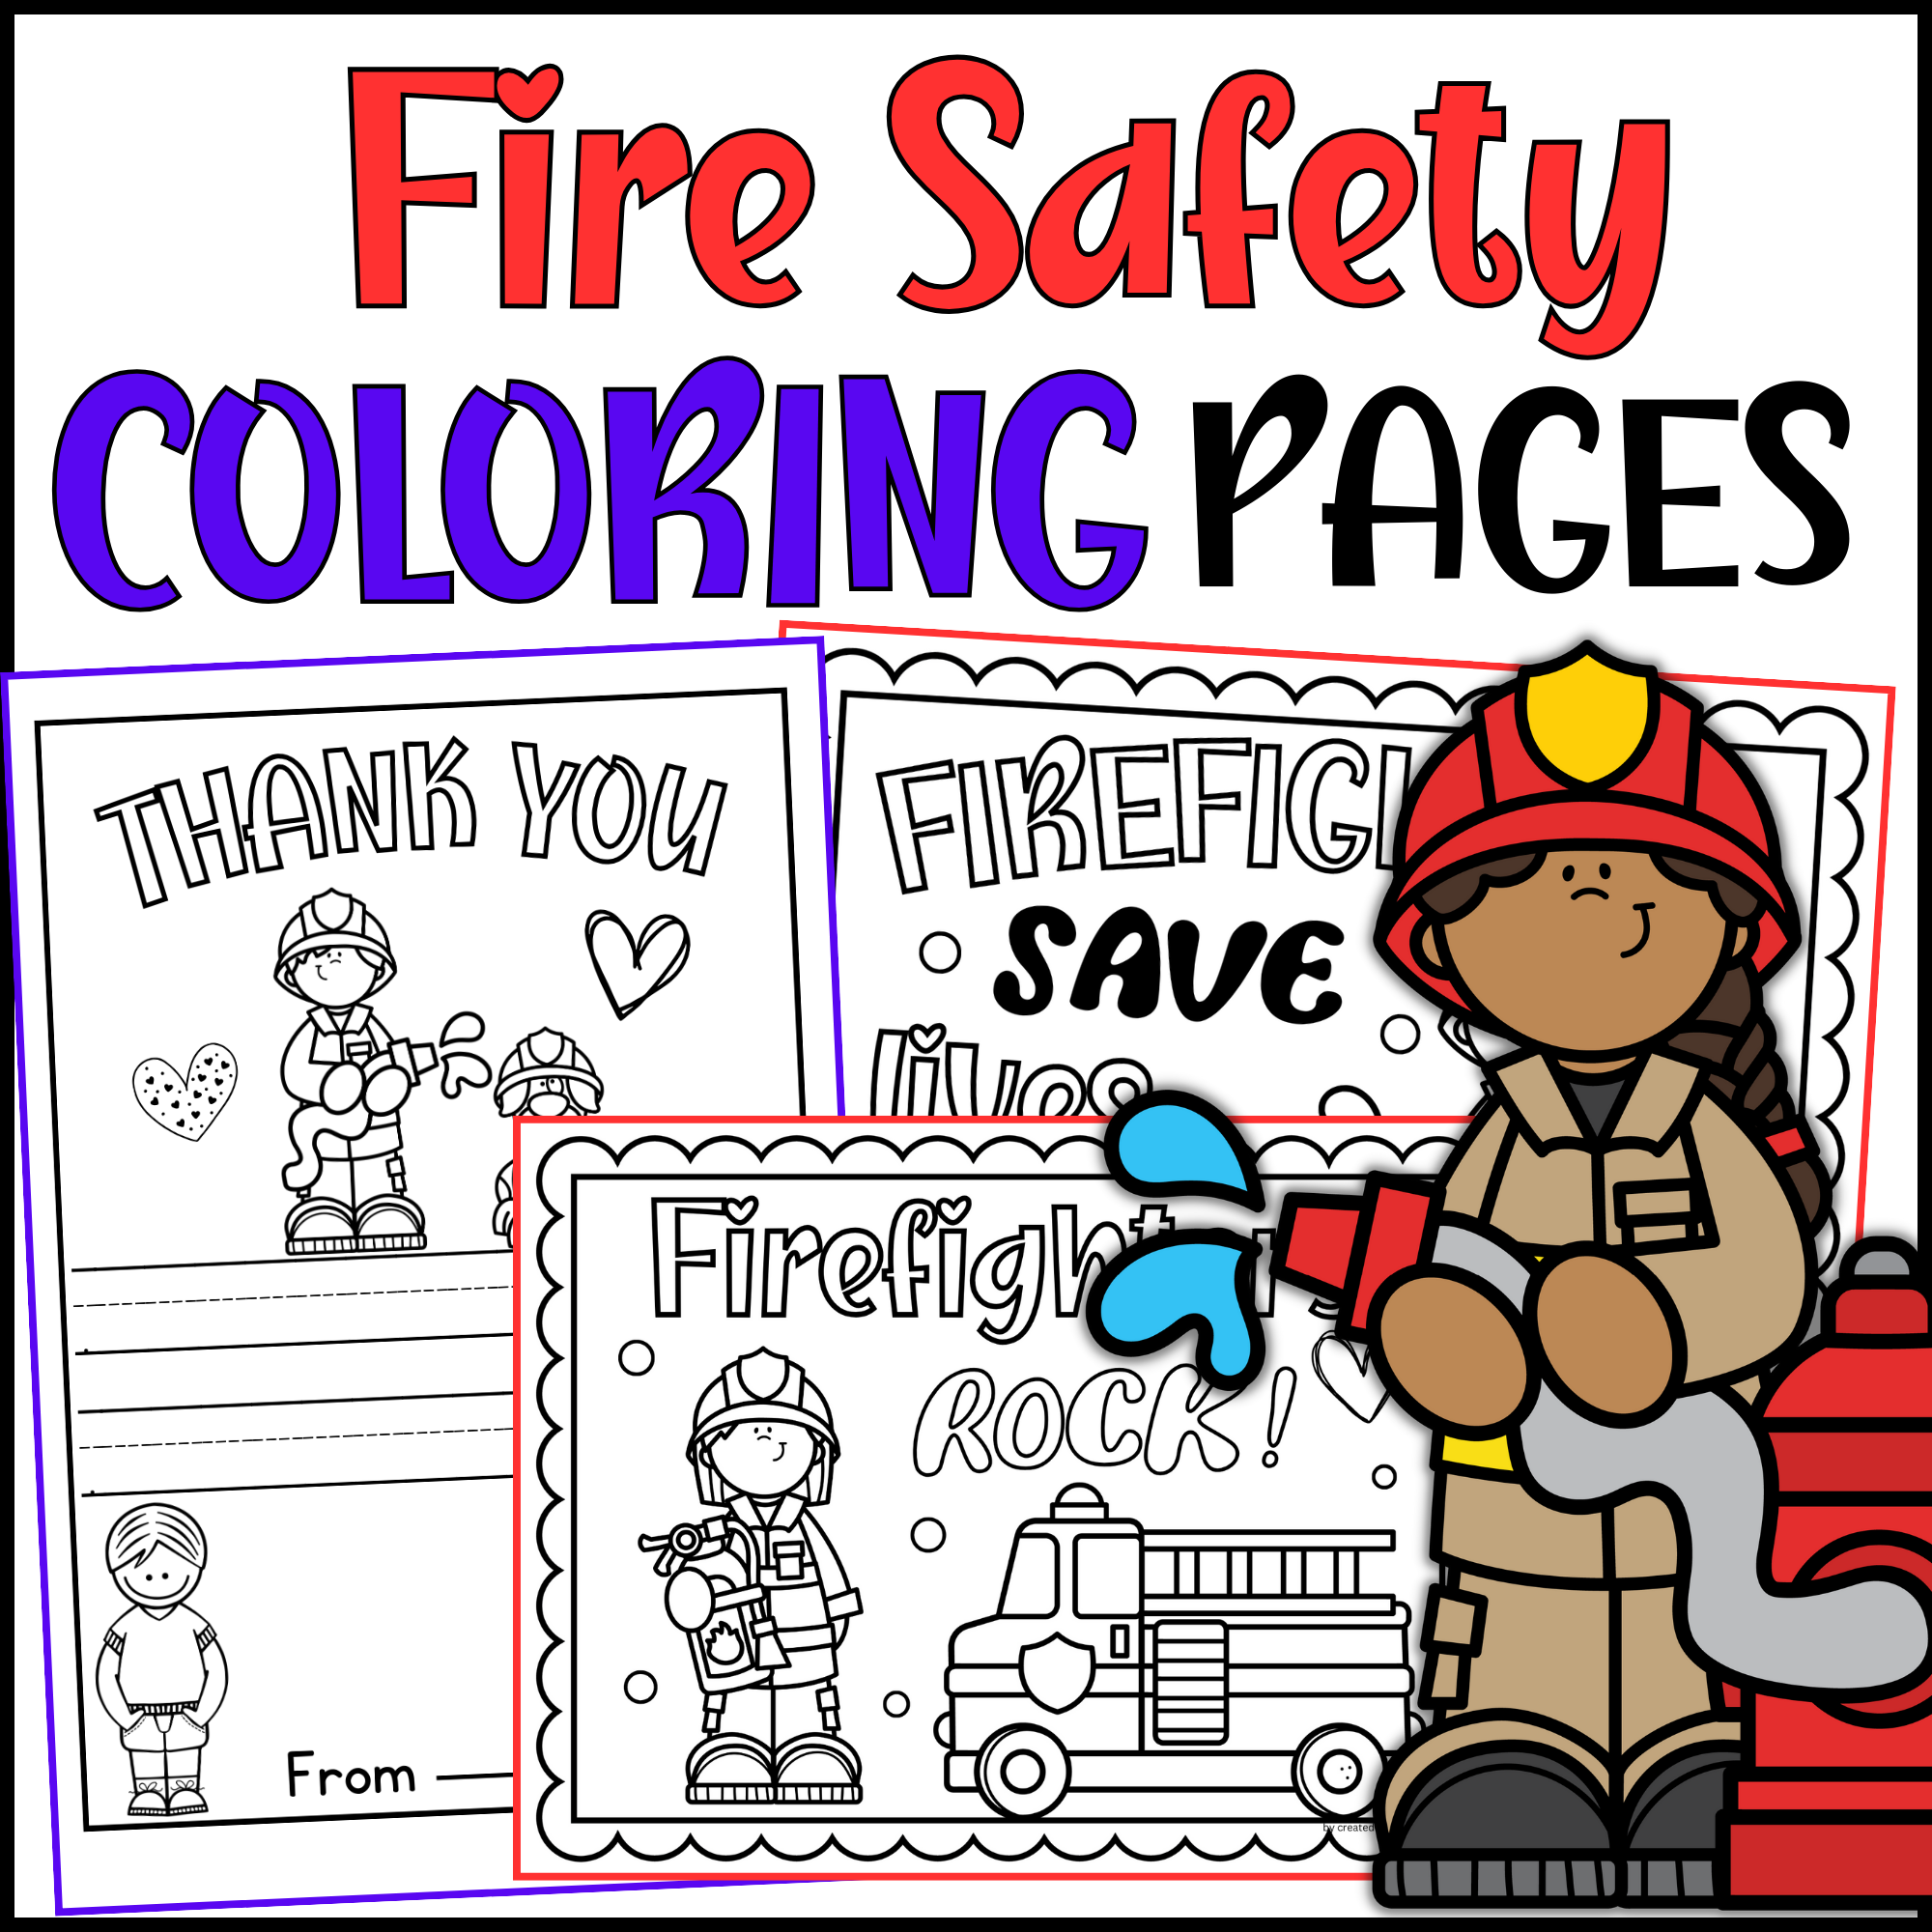 Firefighters coloring pages appreciation cards munity helpers thank you made by teachers